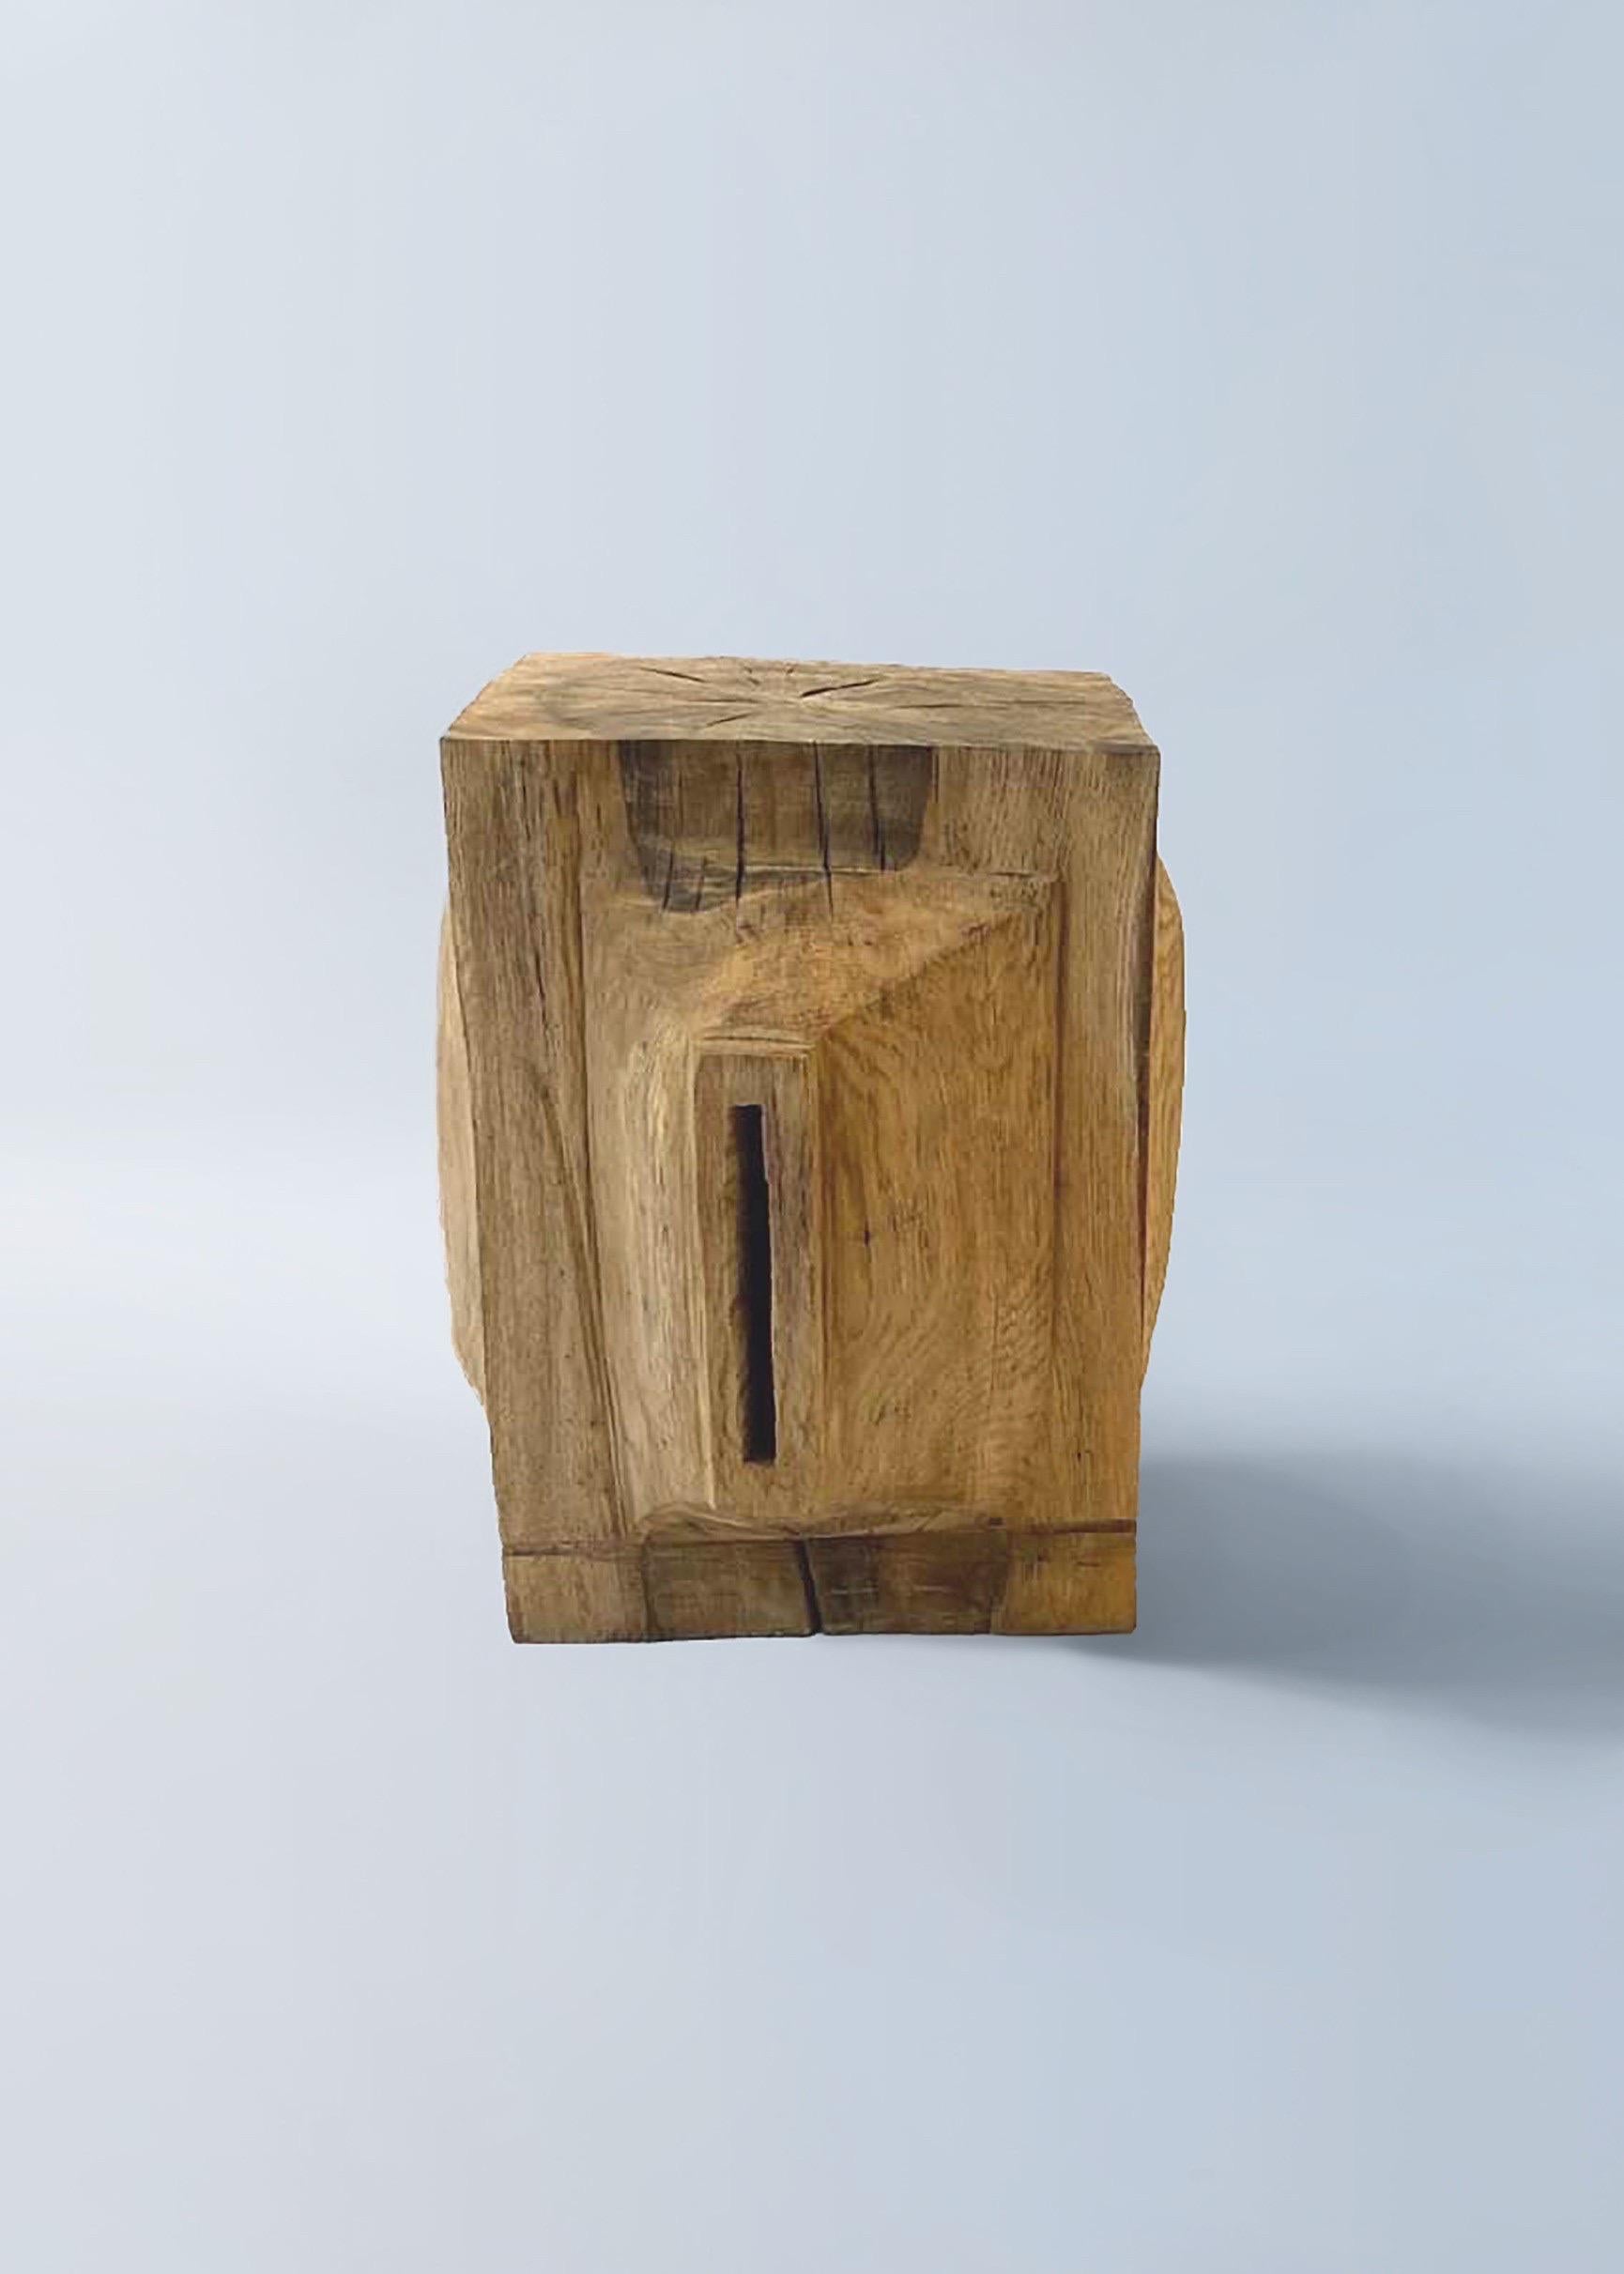 Hand-Carved Hiroyuki Nishimura Zougei Sculptural Side Table Stool 33 Tribal Glamping For Sale